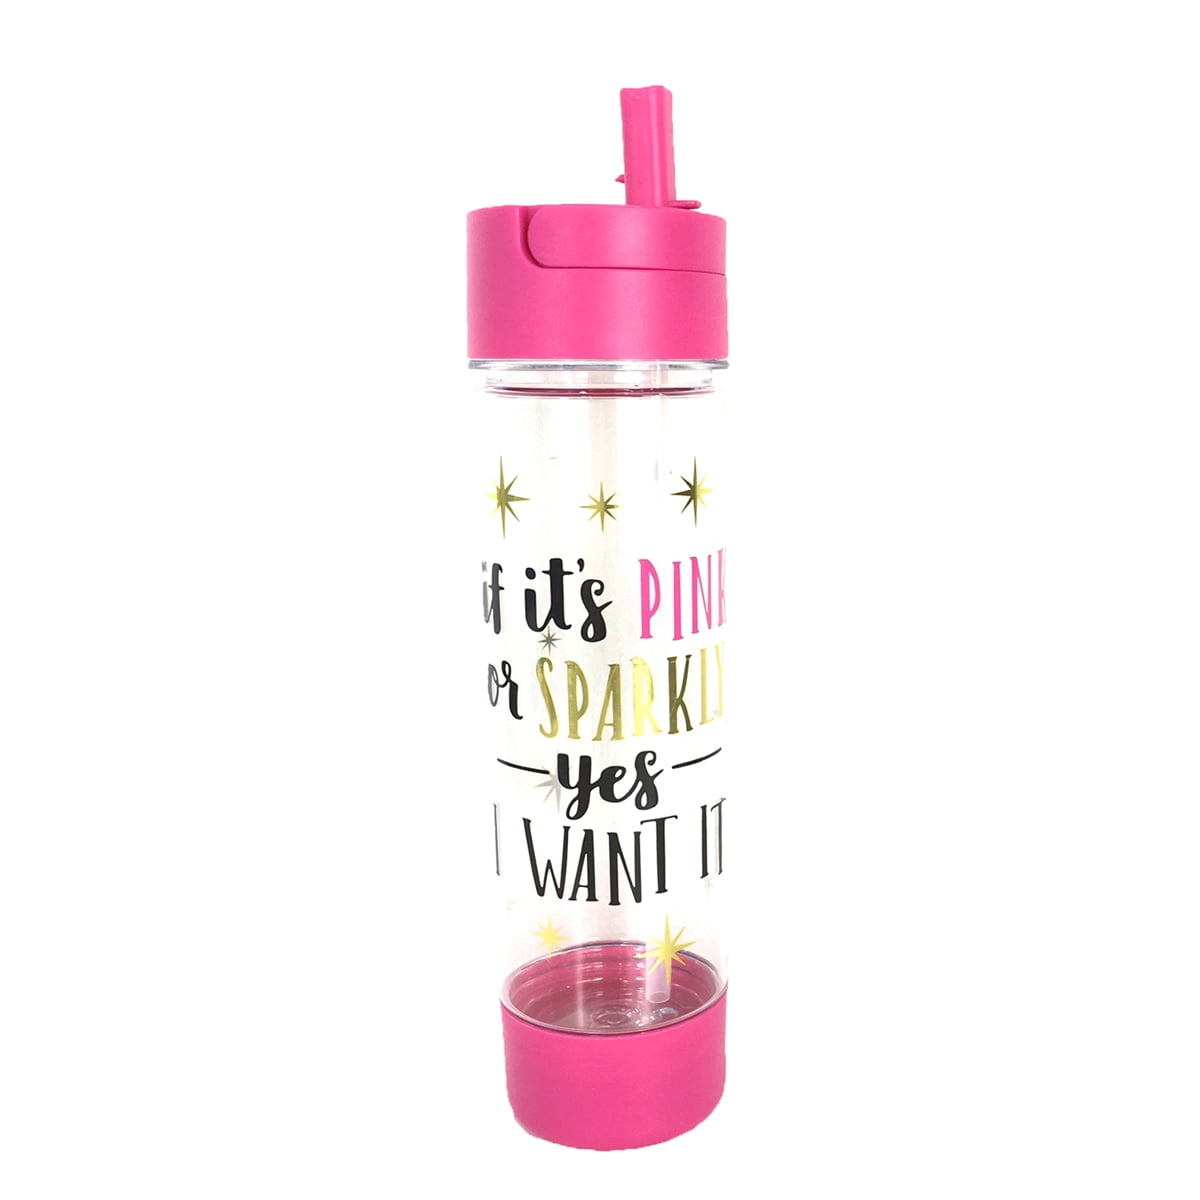 DEARART 32oz Pink Water Bottle With Handle AUTOSEAL BPA FREE, Clear Bottles  Flip Up Lid, Suit Women …See more DEARART 32oz Pink Water Bottle With